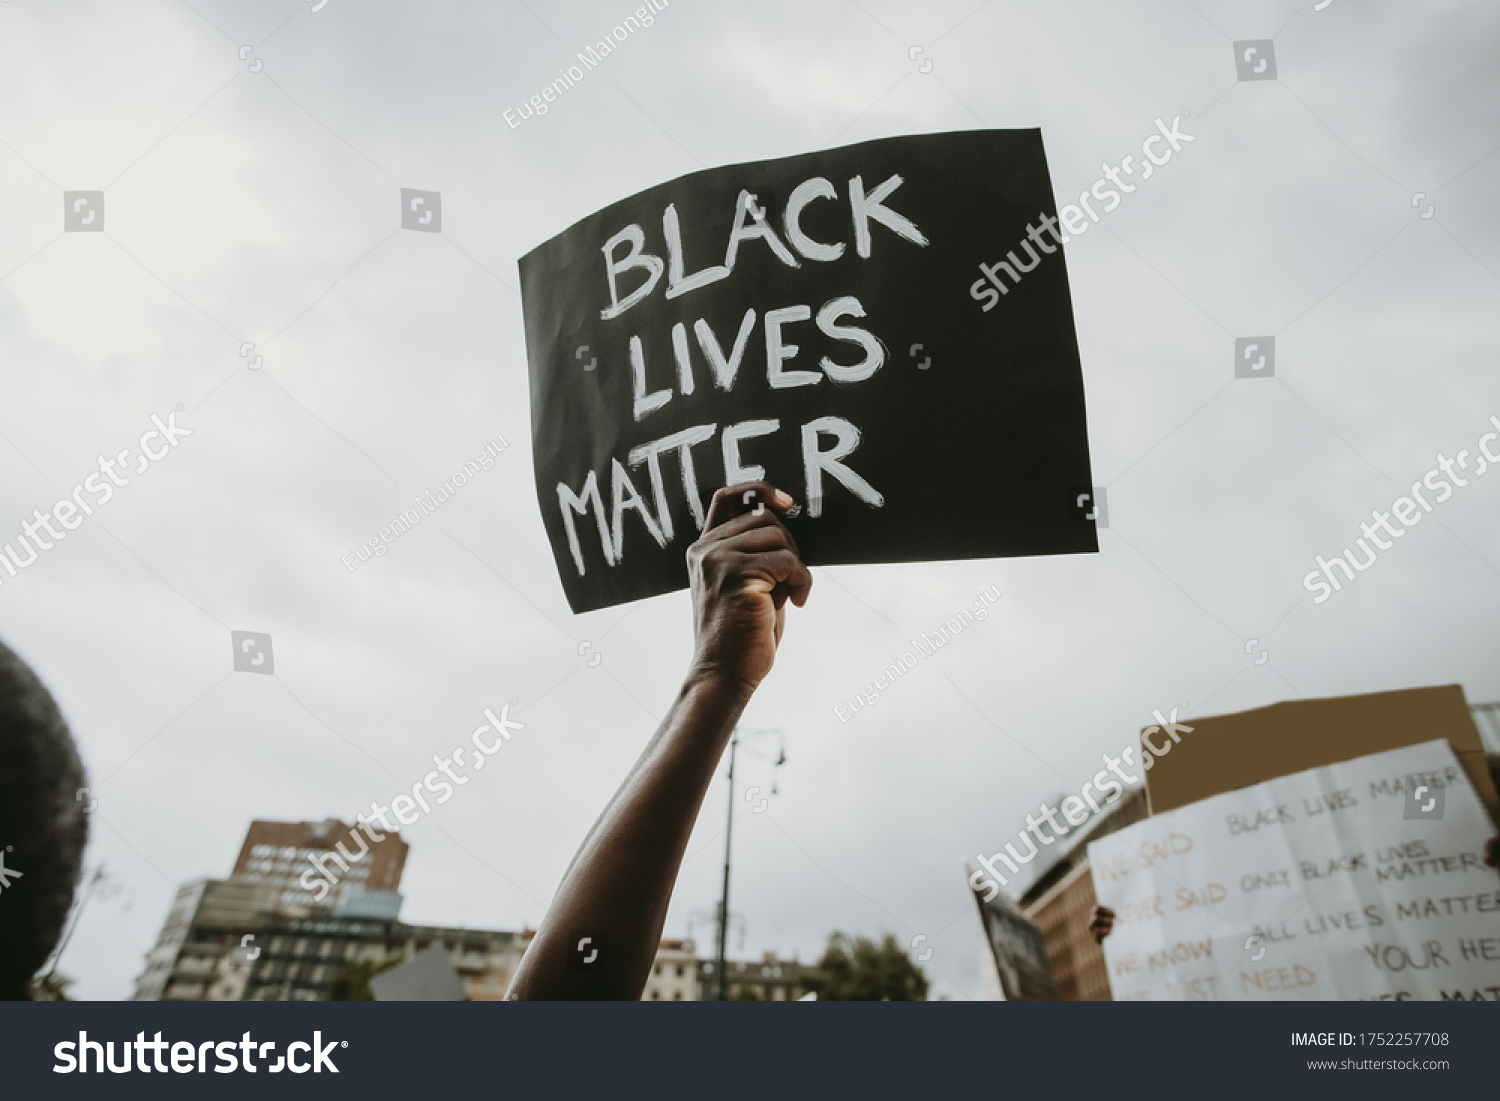  Black lives matter movement protesting in Milan, claiming for antiracism and equal human rights holding "Black lives matter" picket sign #1752257708